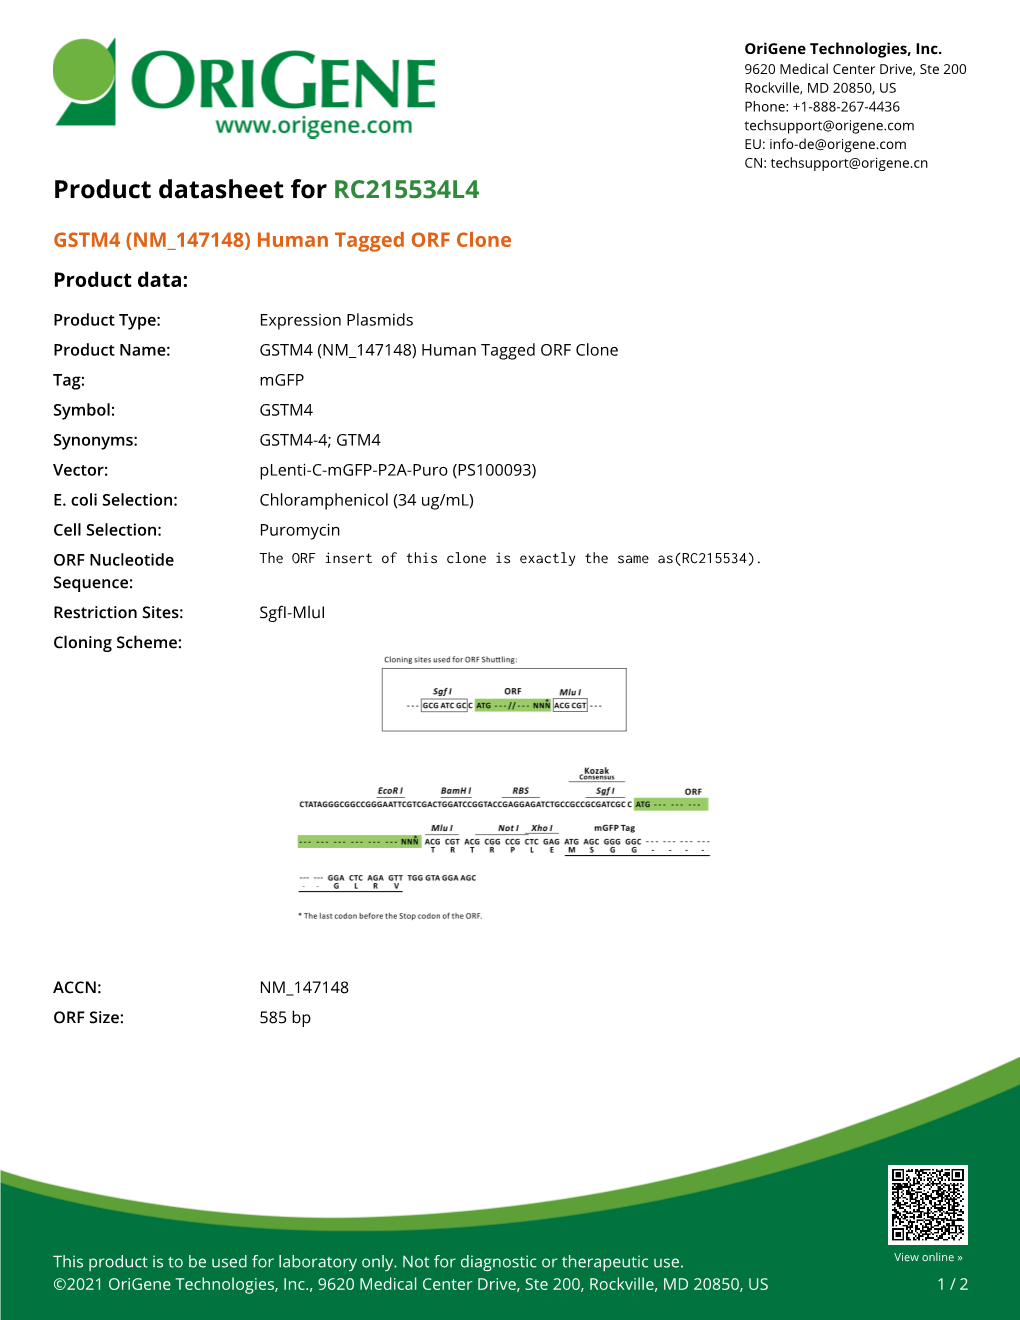 GSTM4 (NM 147148) Human Tagged ORF Clone Product Data